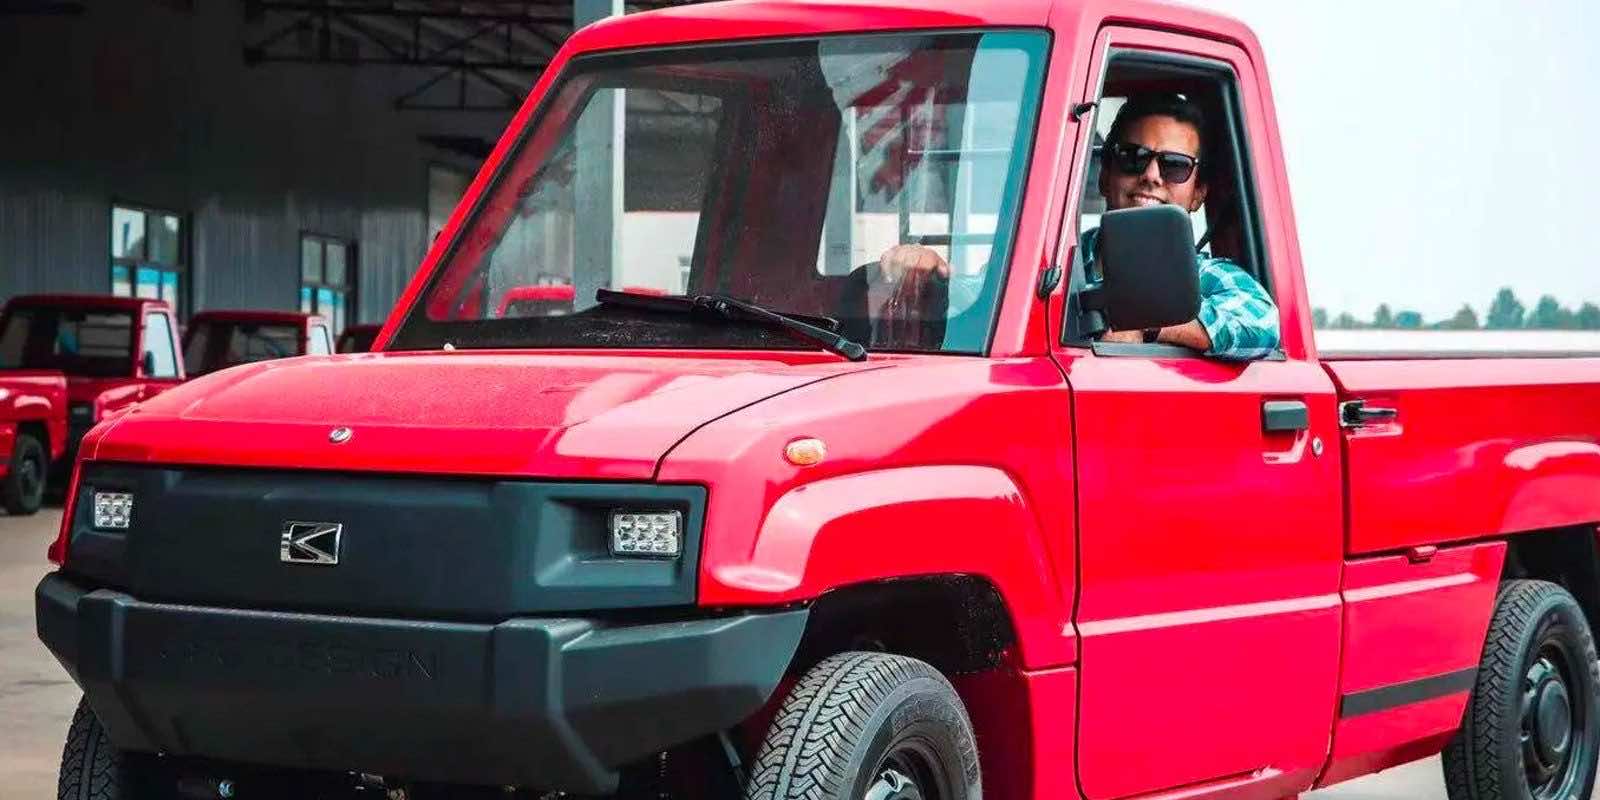 This Mini Electric Pickup Truck With 110 KM Range Costs Only $2,600